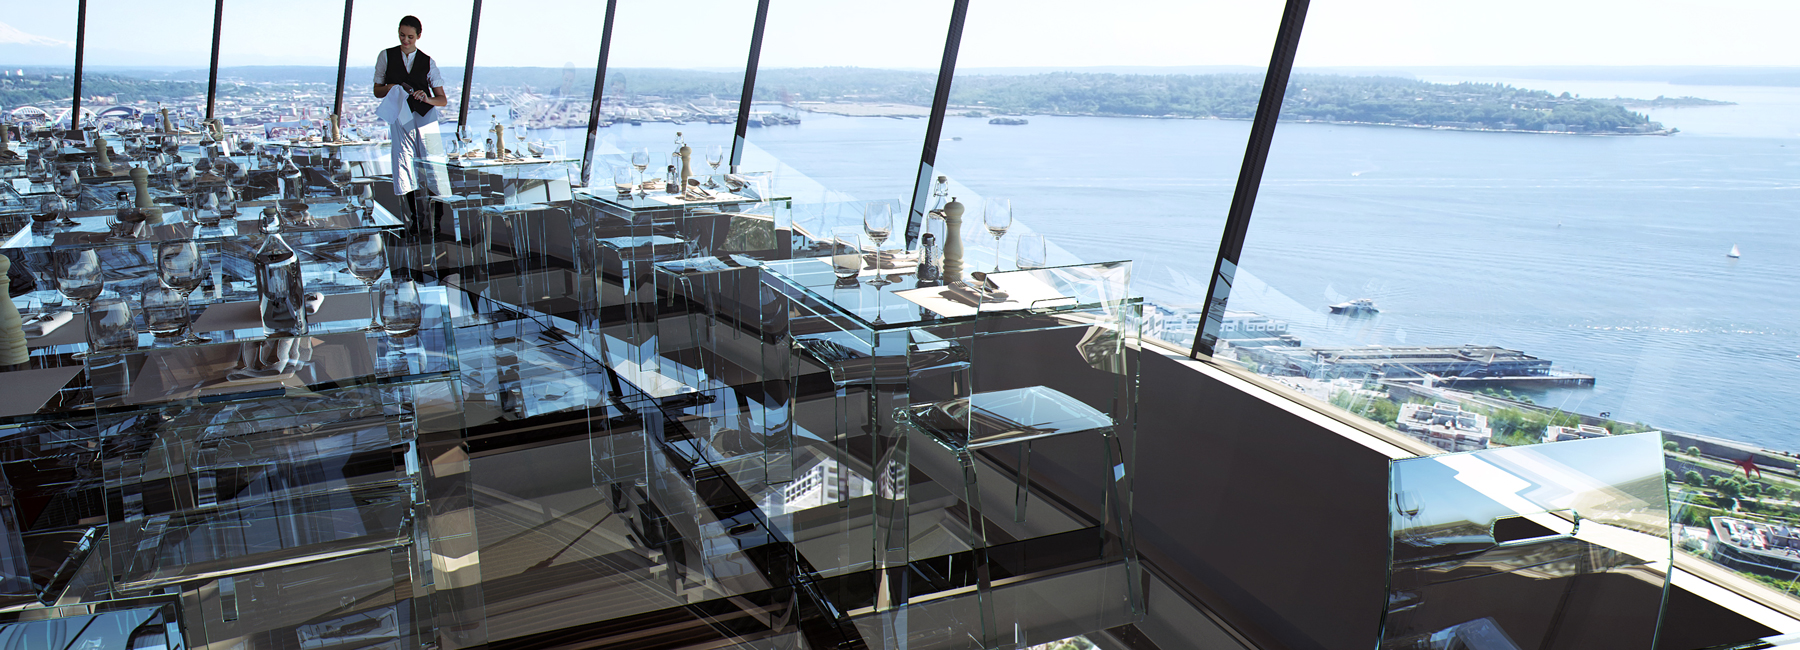 redesign of seattle space needle includes glass floors for dining experience at 500 feet